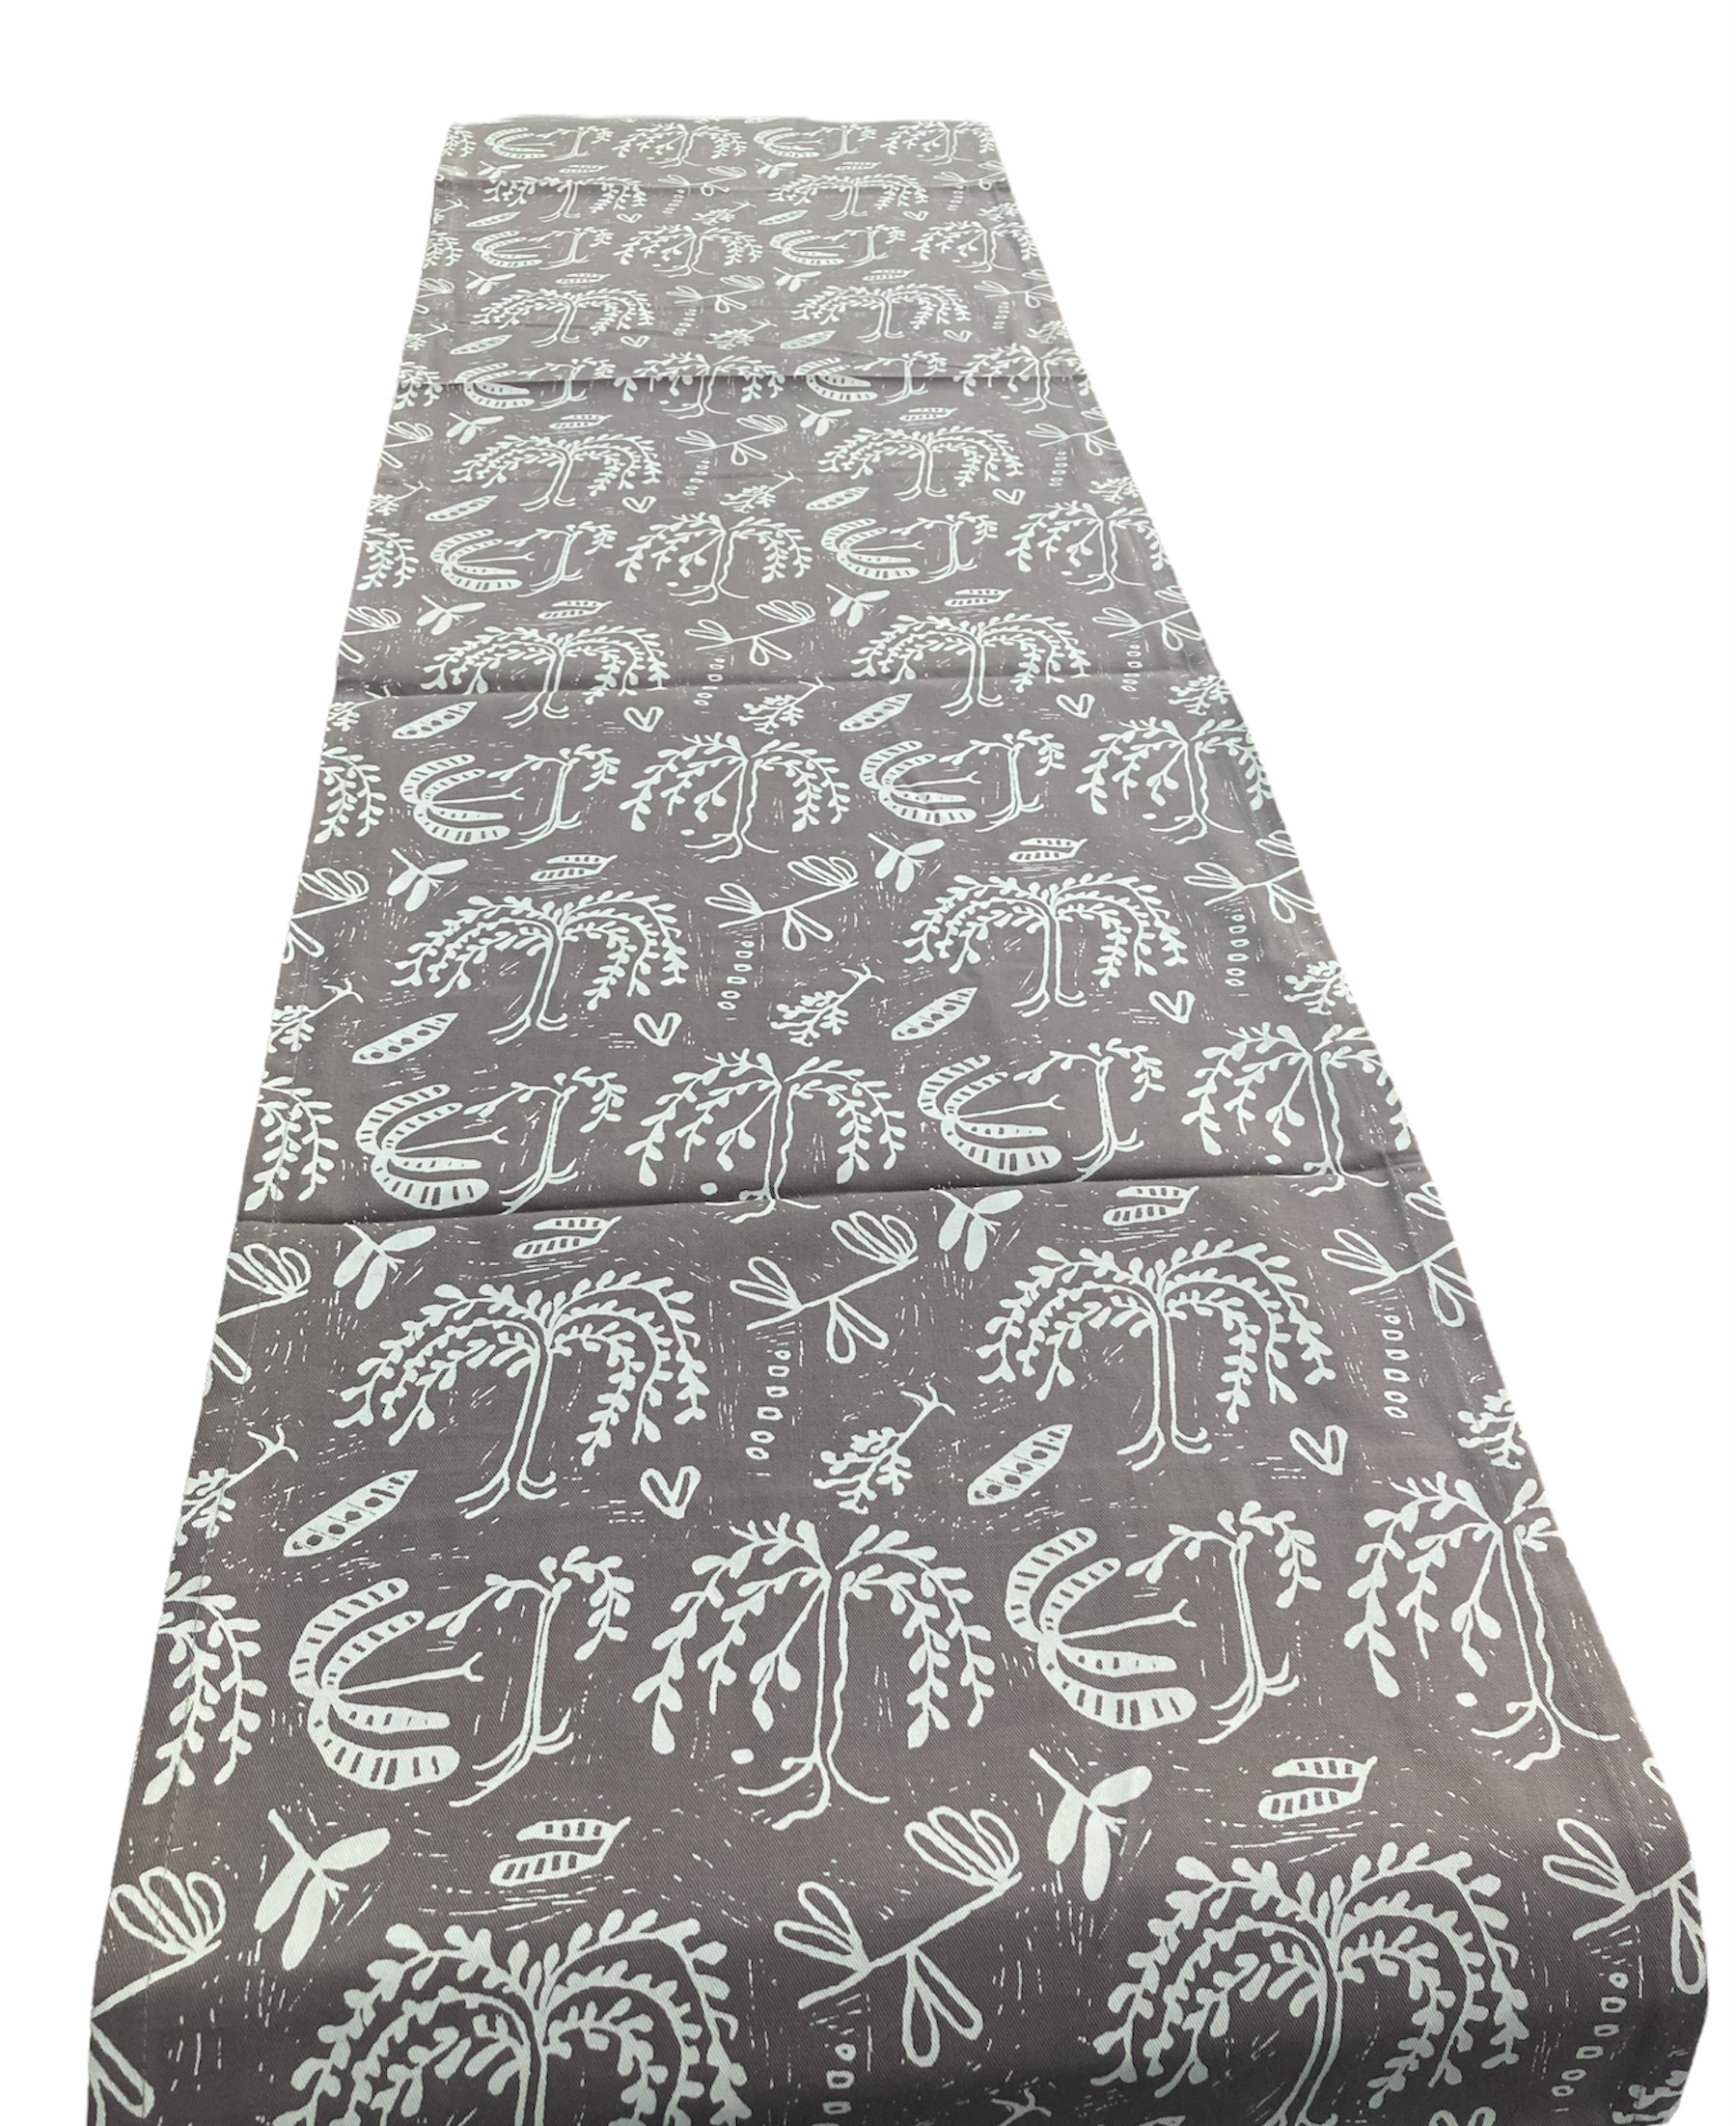 100% cotton Table Runner 96" x 16" from Namibia - Design 18l